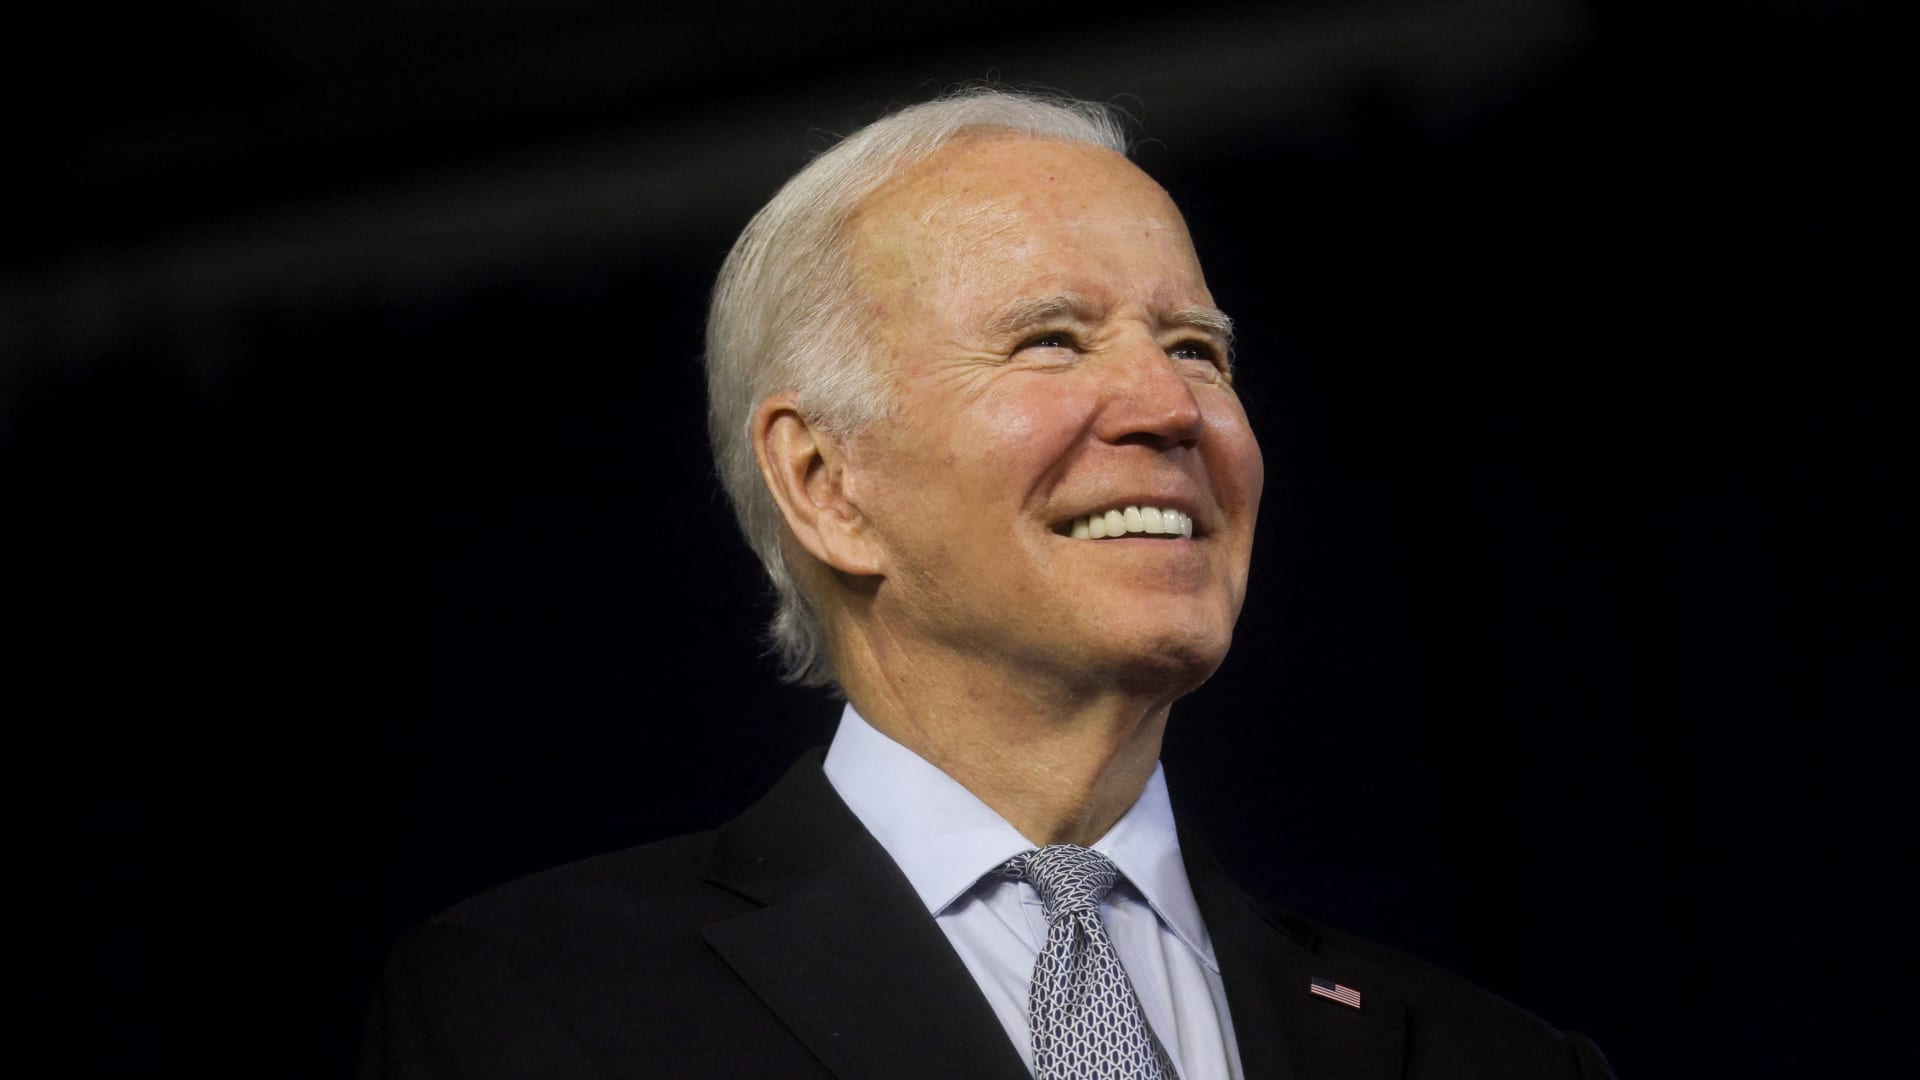 Midterm results are looking increasingly sunny for Biden as Democrats avoid ‘red wave’